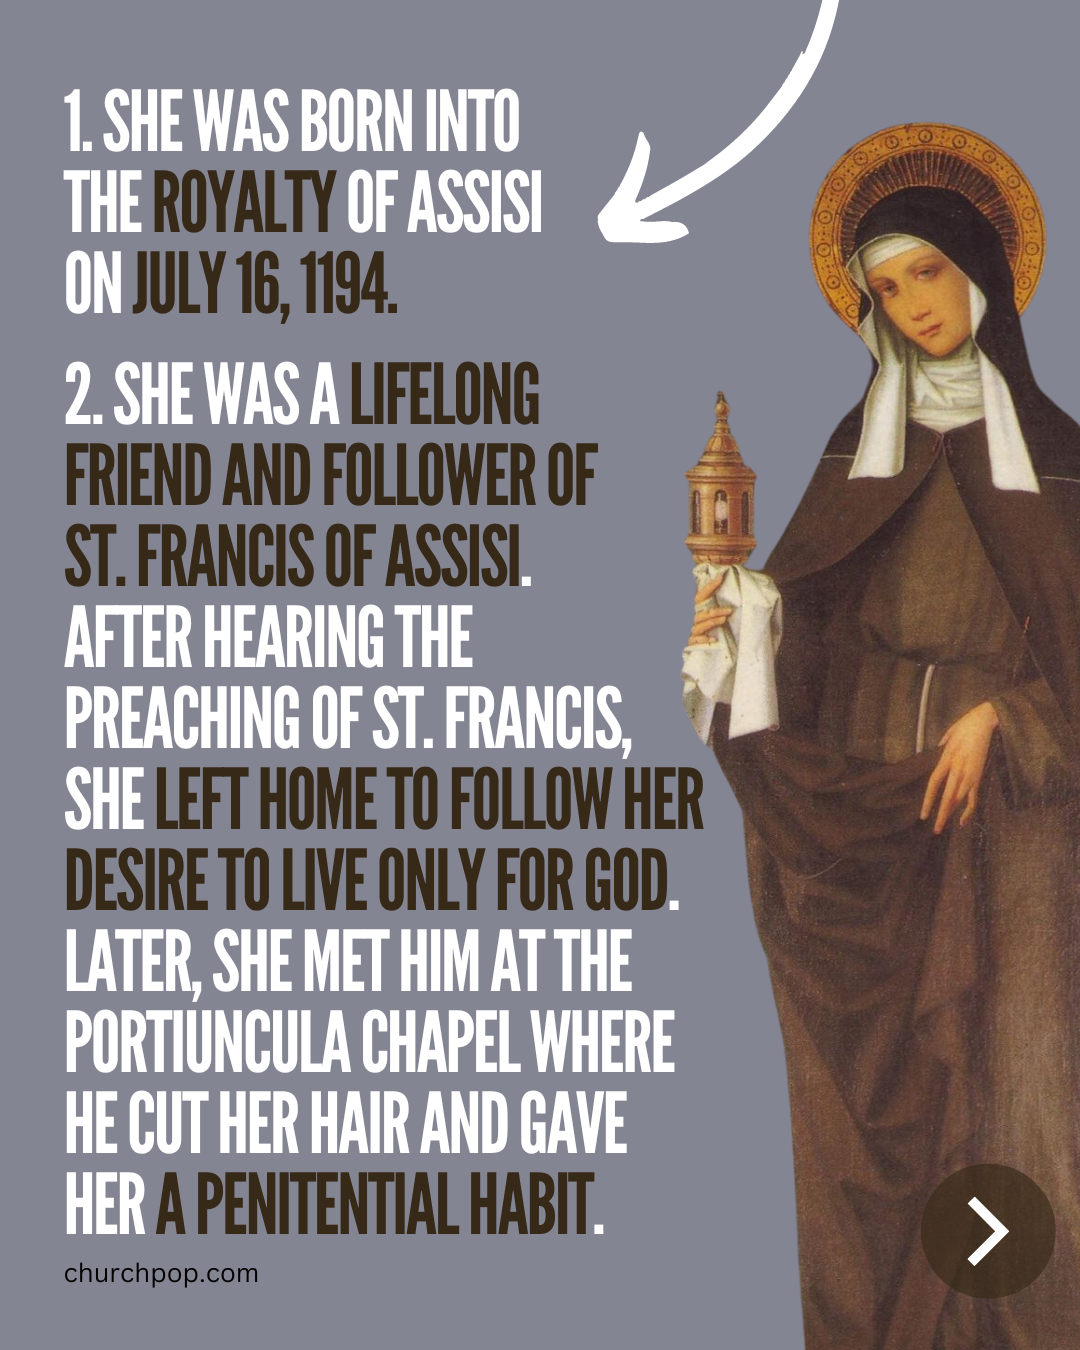 Who was Saint Clare of Assisi?